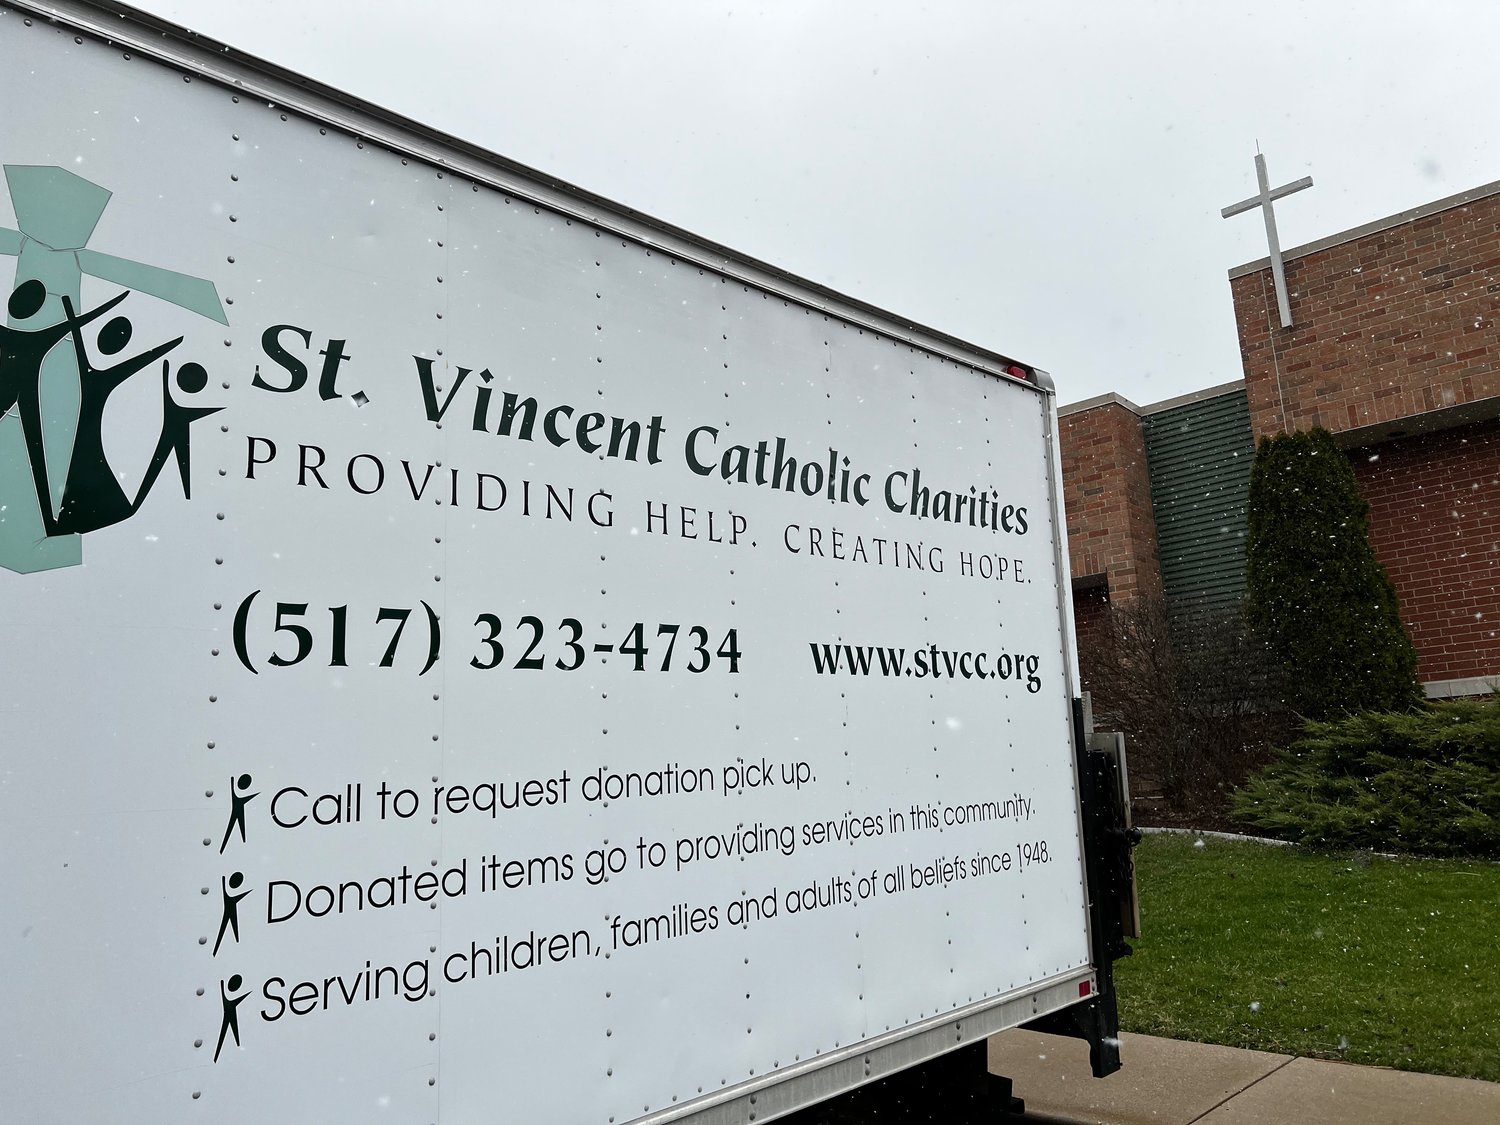 St. Vincent Catholic Charities runs one of the most active refugee resettlement programs in mid-Michigan, welcoming at least 278 Afghan refugees to Greater Lansing within the last year.